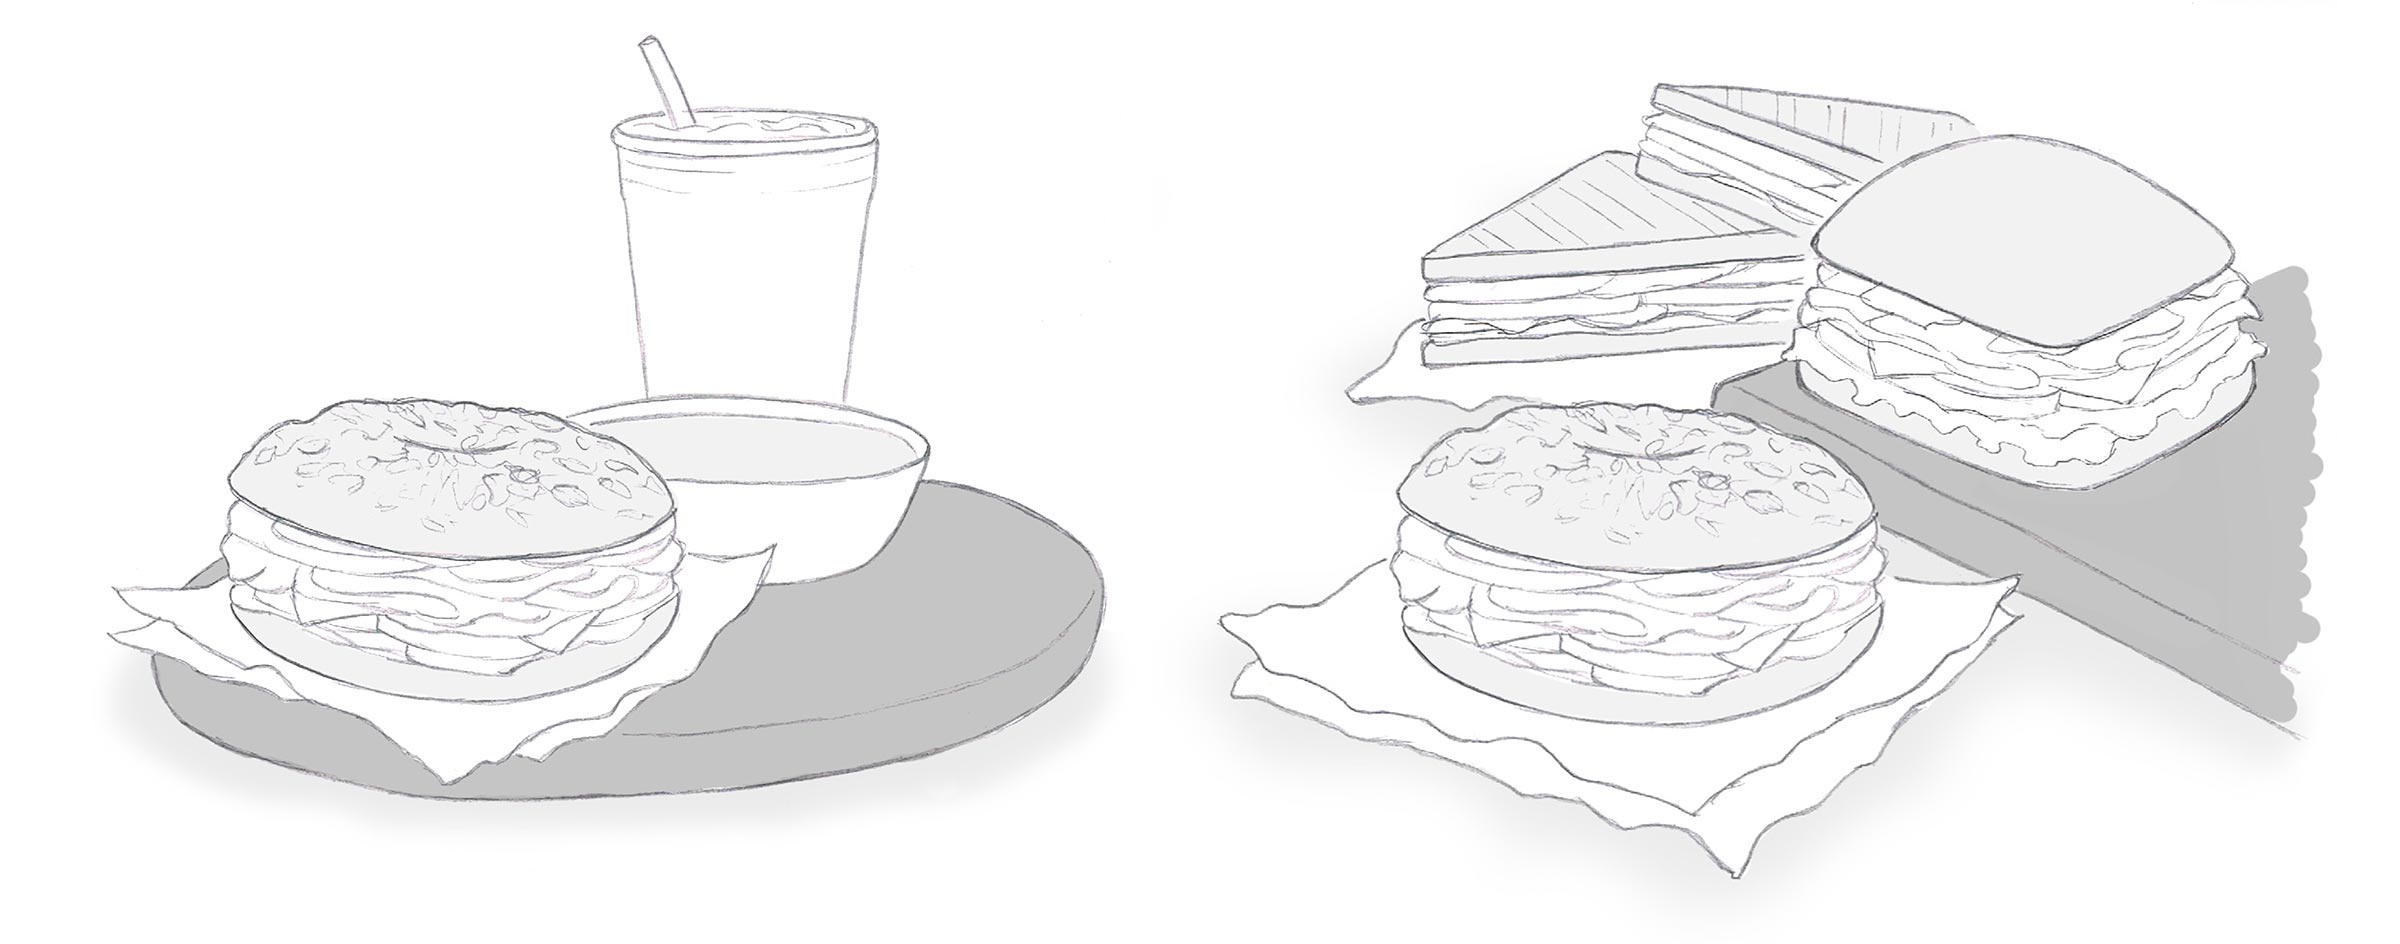 Hand-drawn sketches of sandwiches, a soup bowl and cold drink